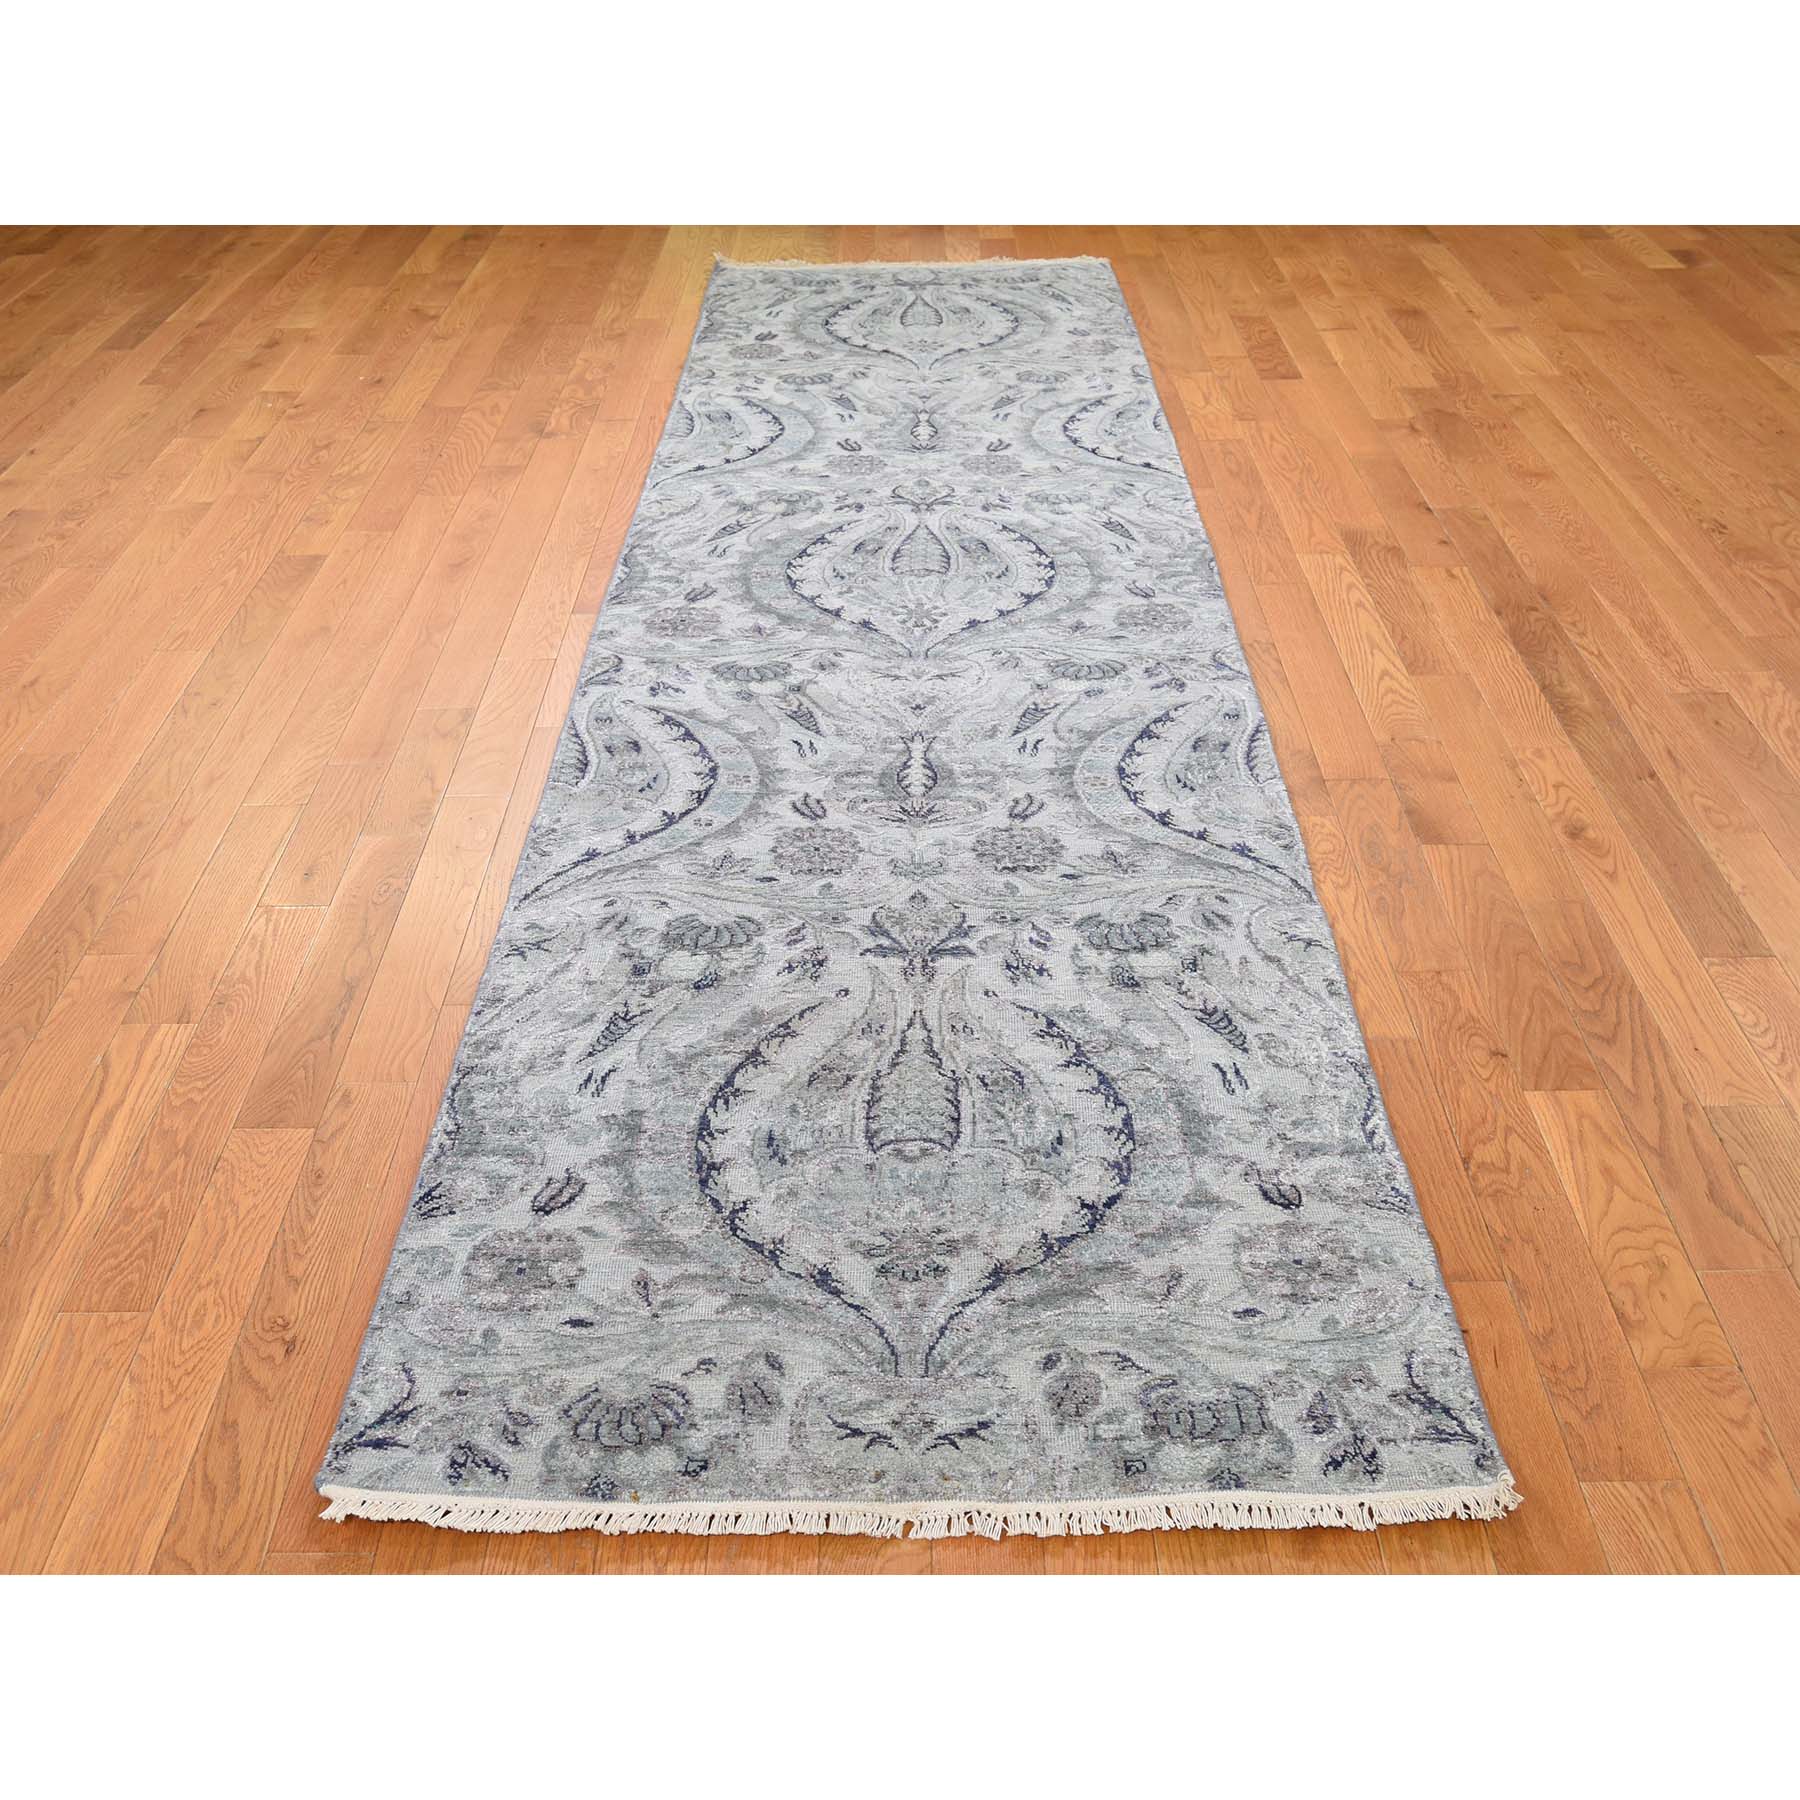 3-x11-10  Pure Silk With Textured Wool Lotus Flower Design Hand-Knotted Rug 